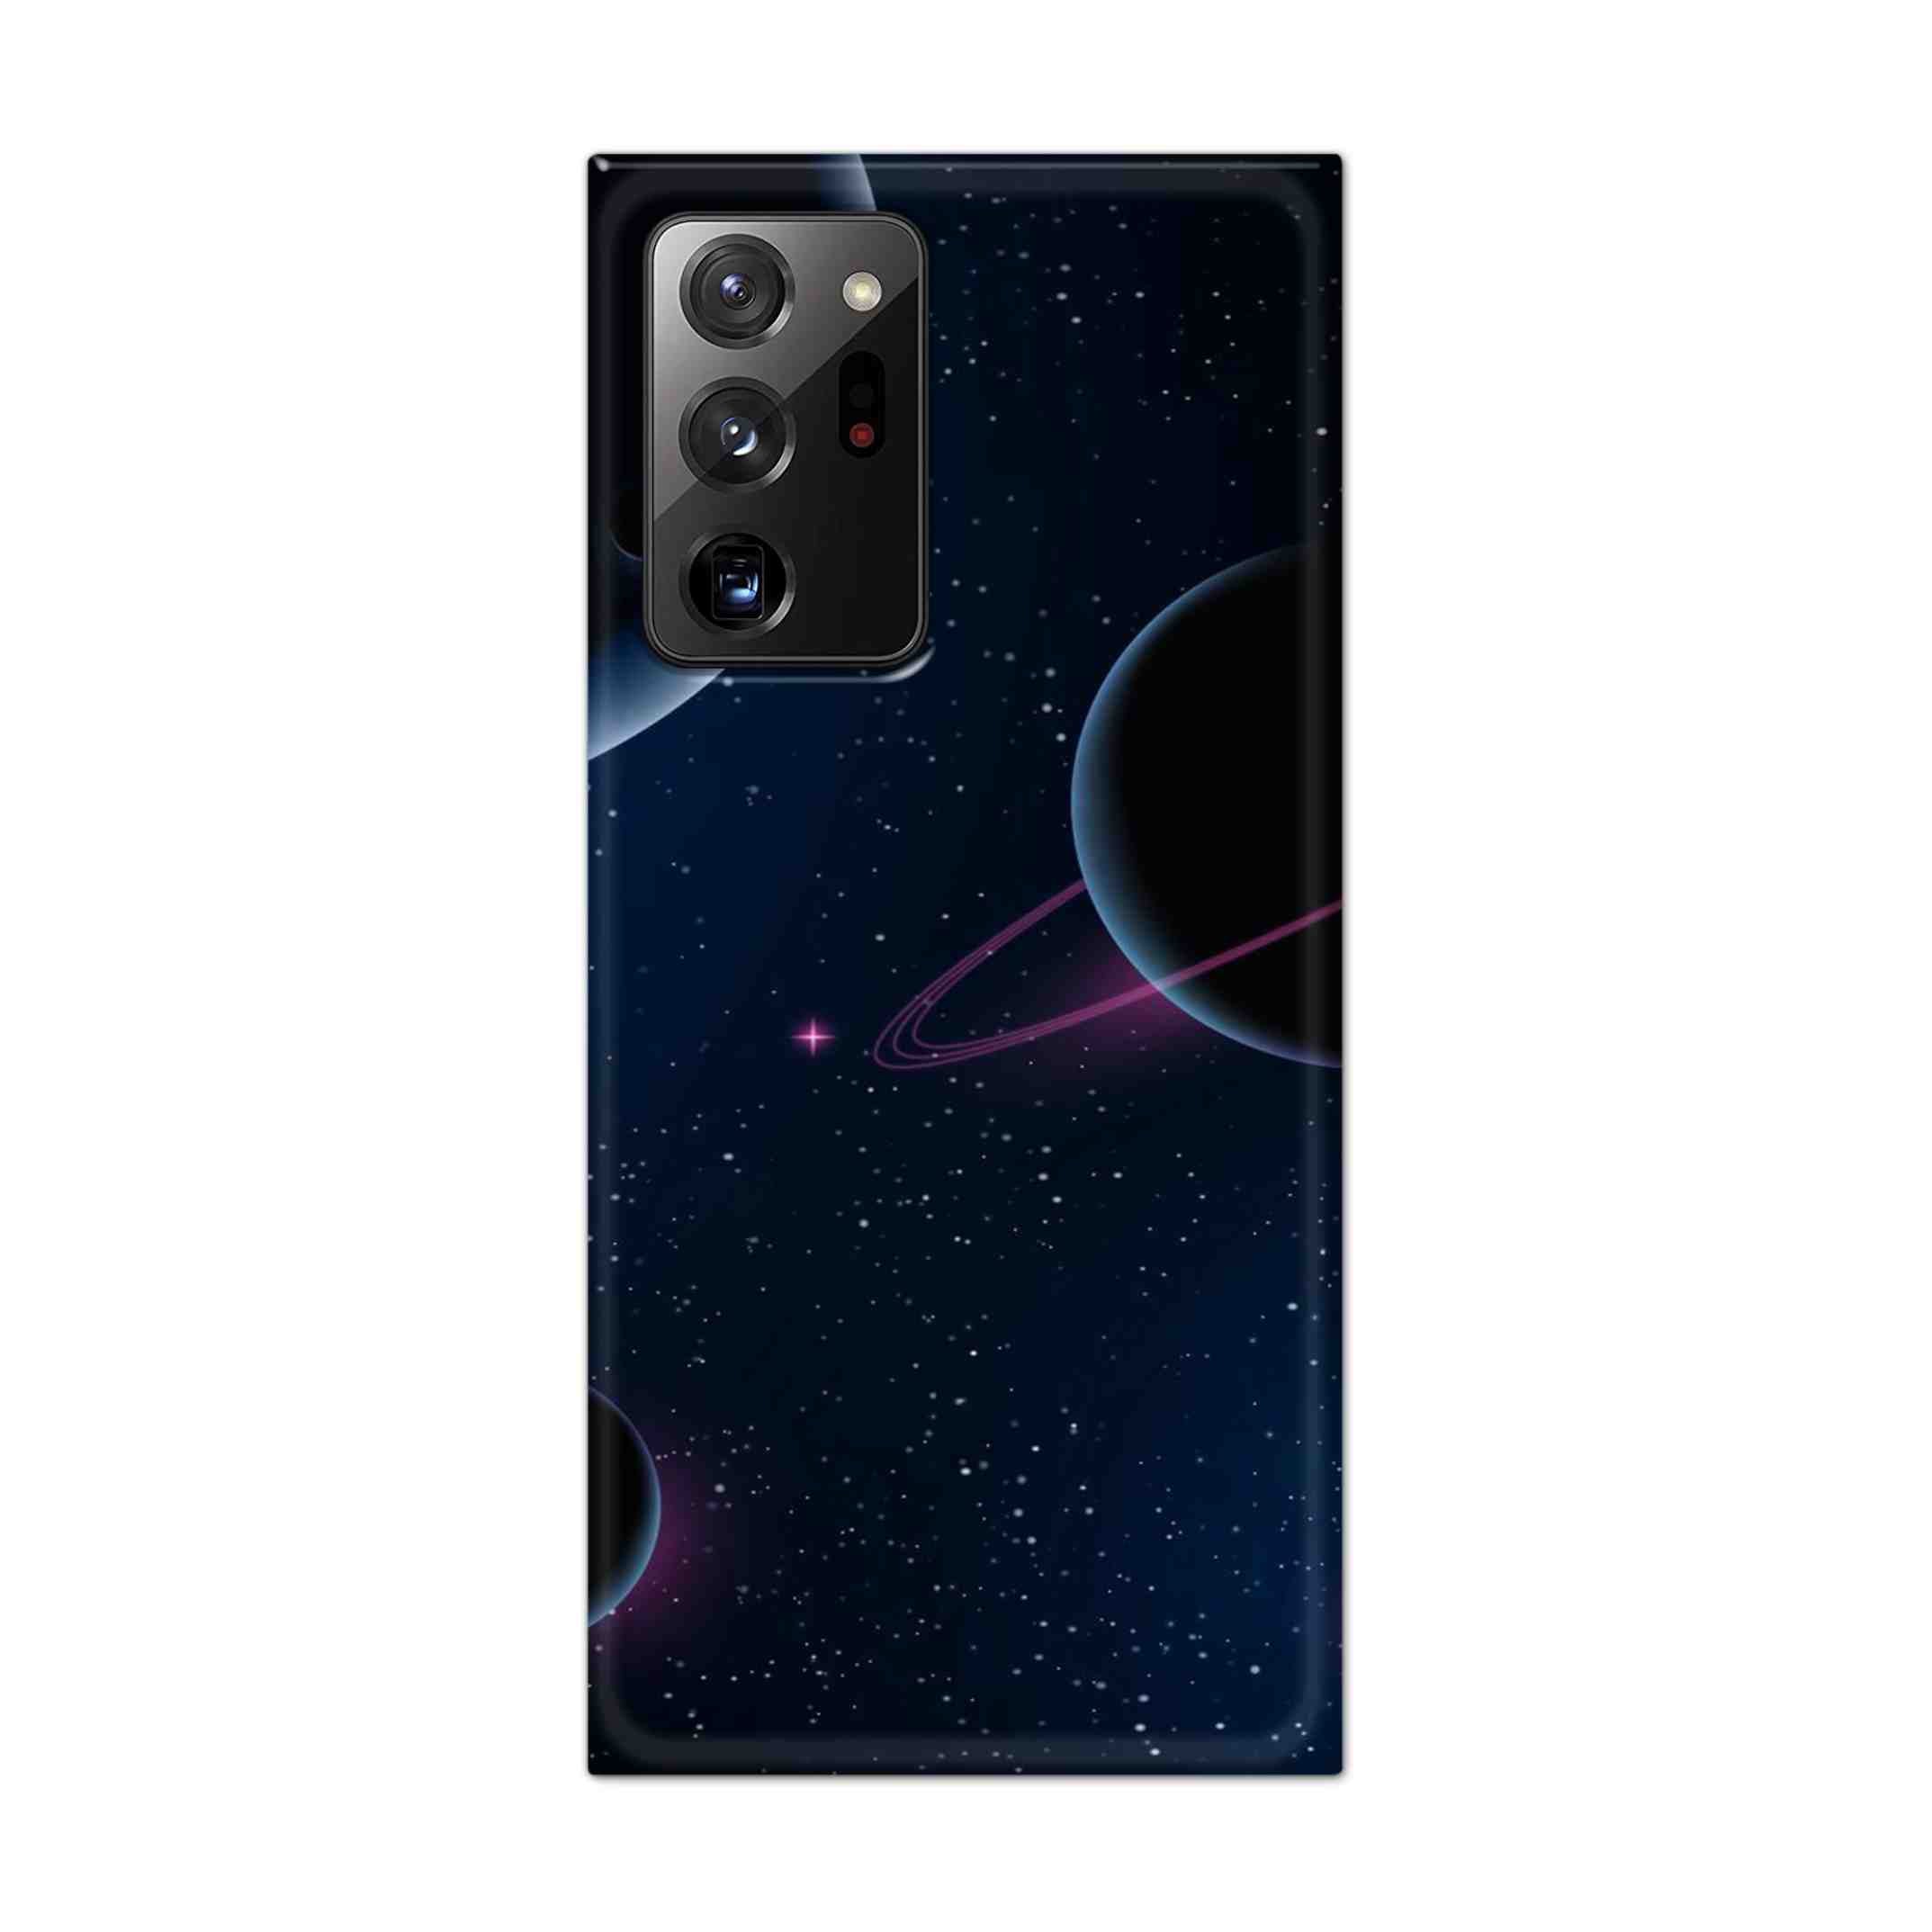 Buy Night Space Hard Back Mobile Phone Case Cover For Samsung Galaxy Note 20 Ultra Online